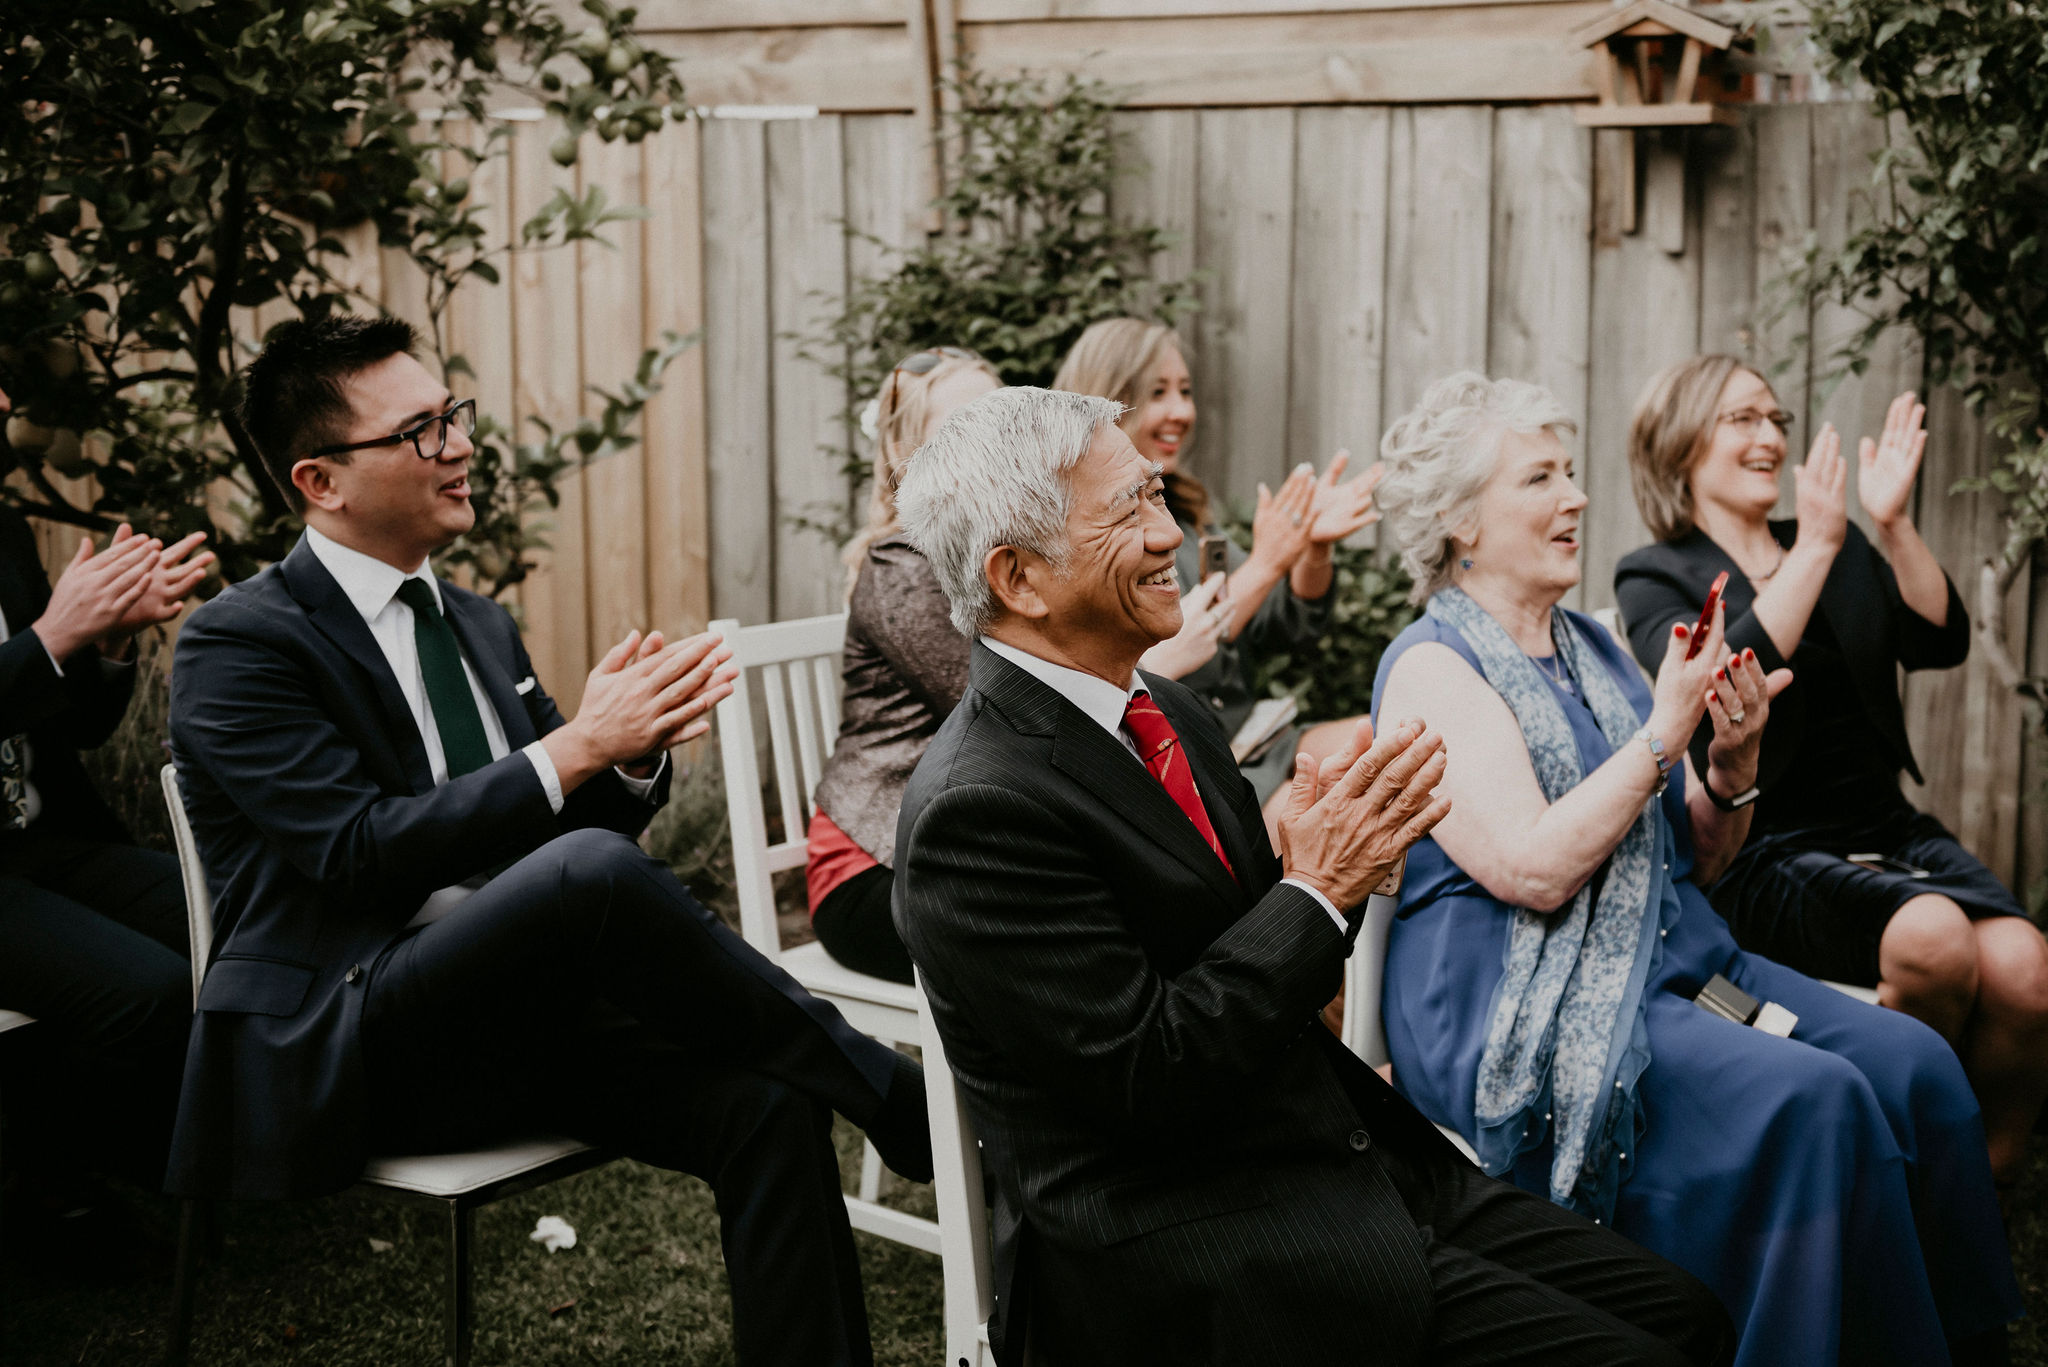 Lets-Elope-Melbourne-Celebrant-Photographer-Elopement-Package-Victoria-Sarah-Matler-Photography-Elope-at-Home-Footscray-weddings-intimate-9